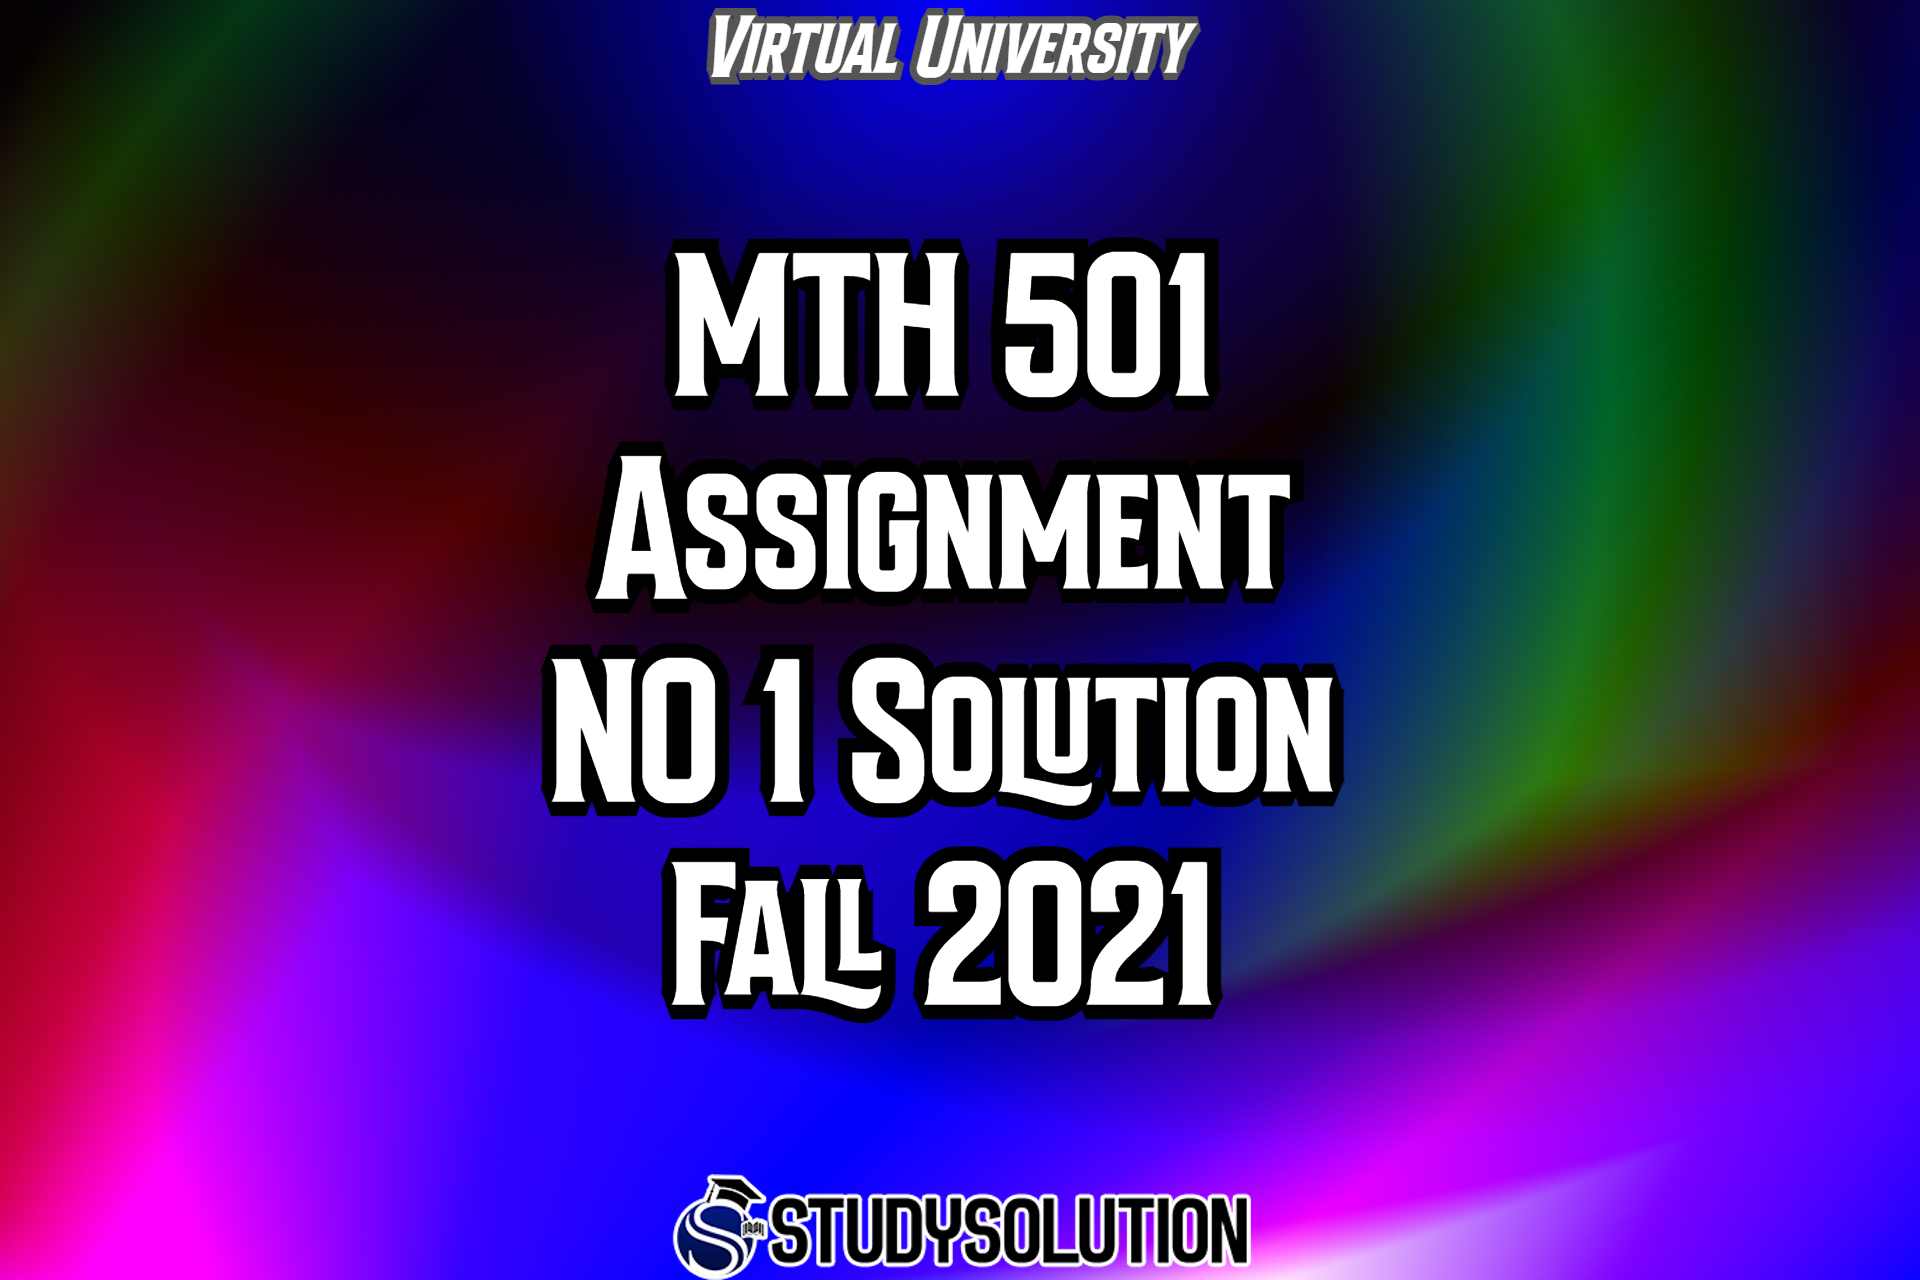 MTH501 Assignment NO 1 Solution Fall 2021